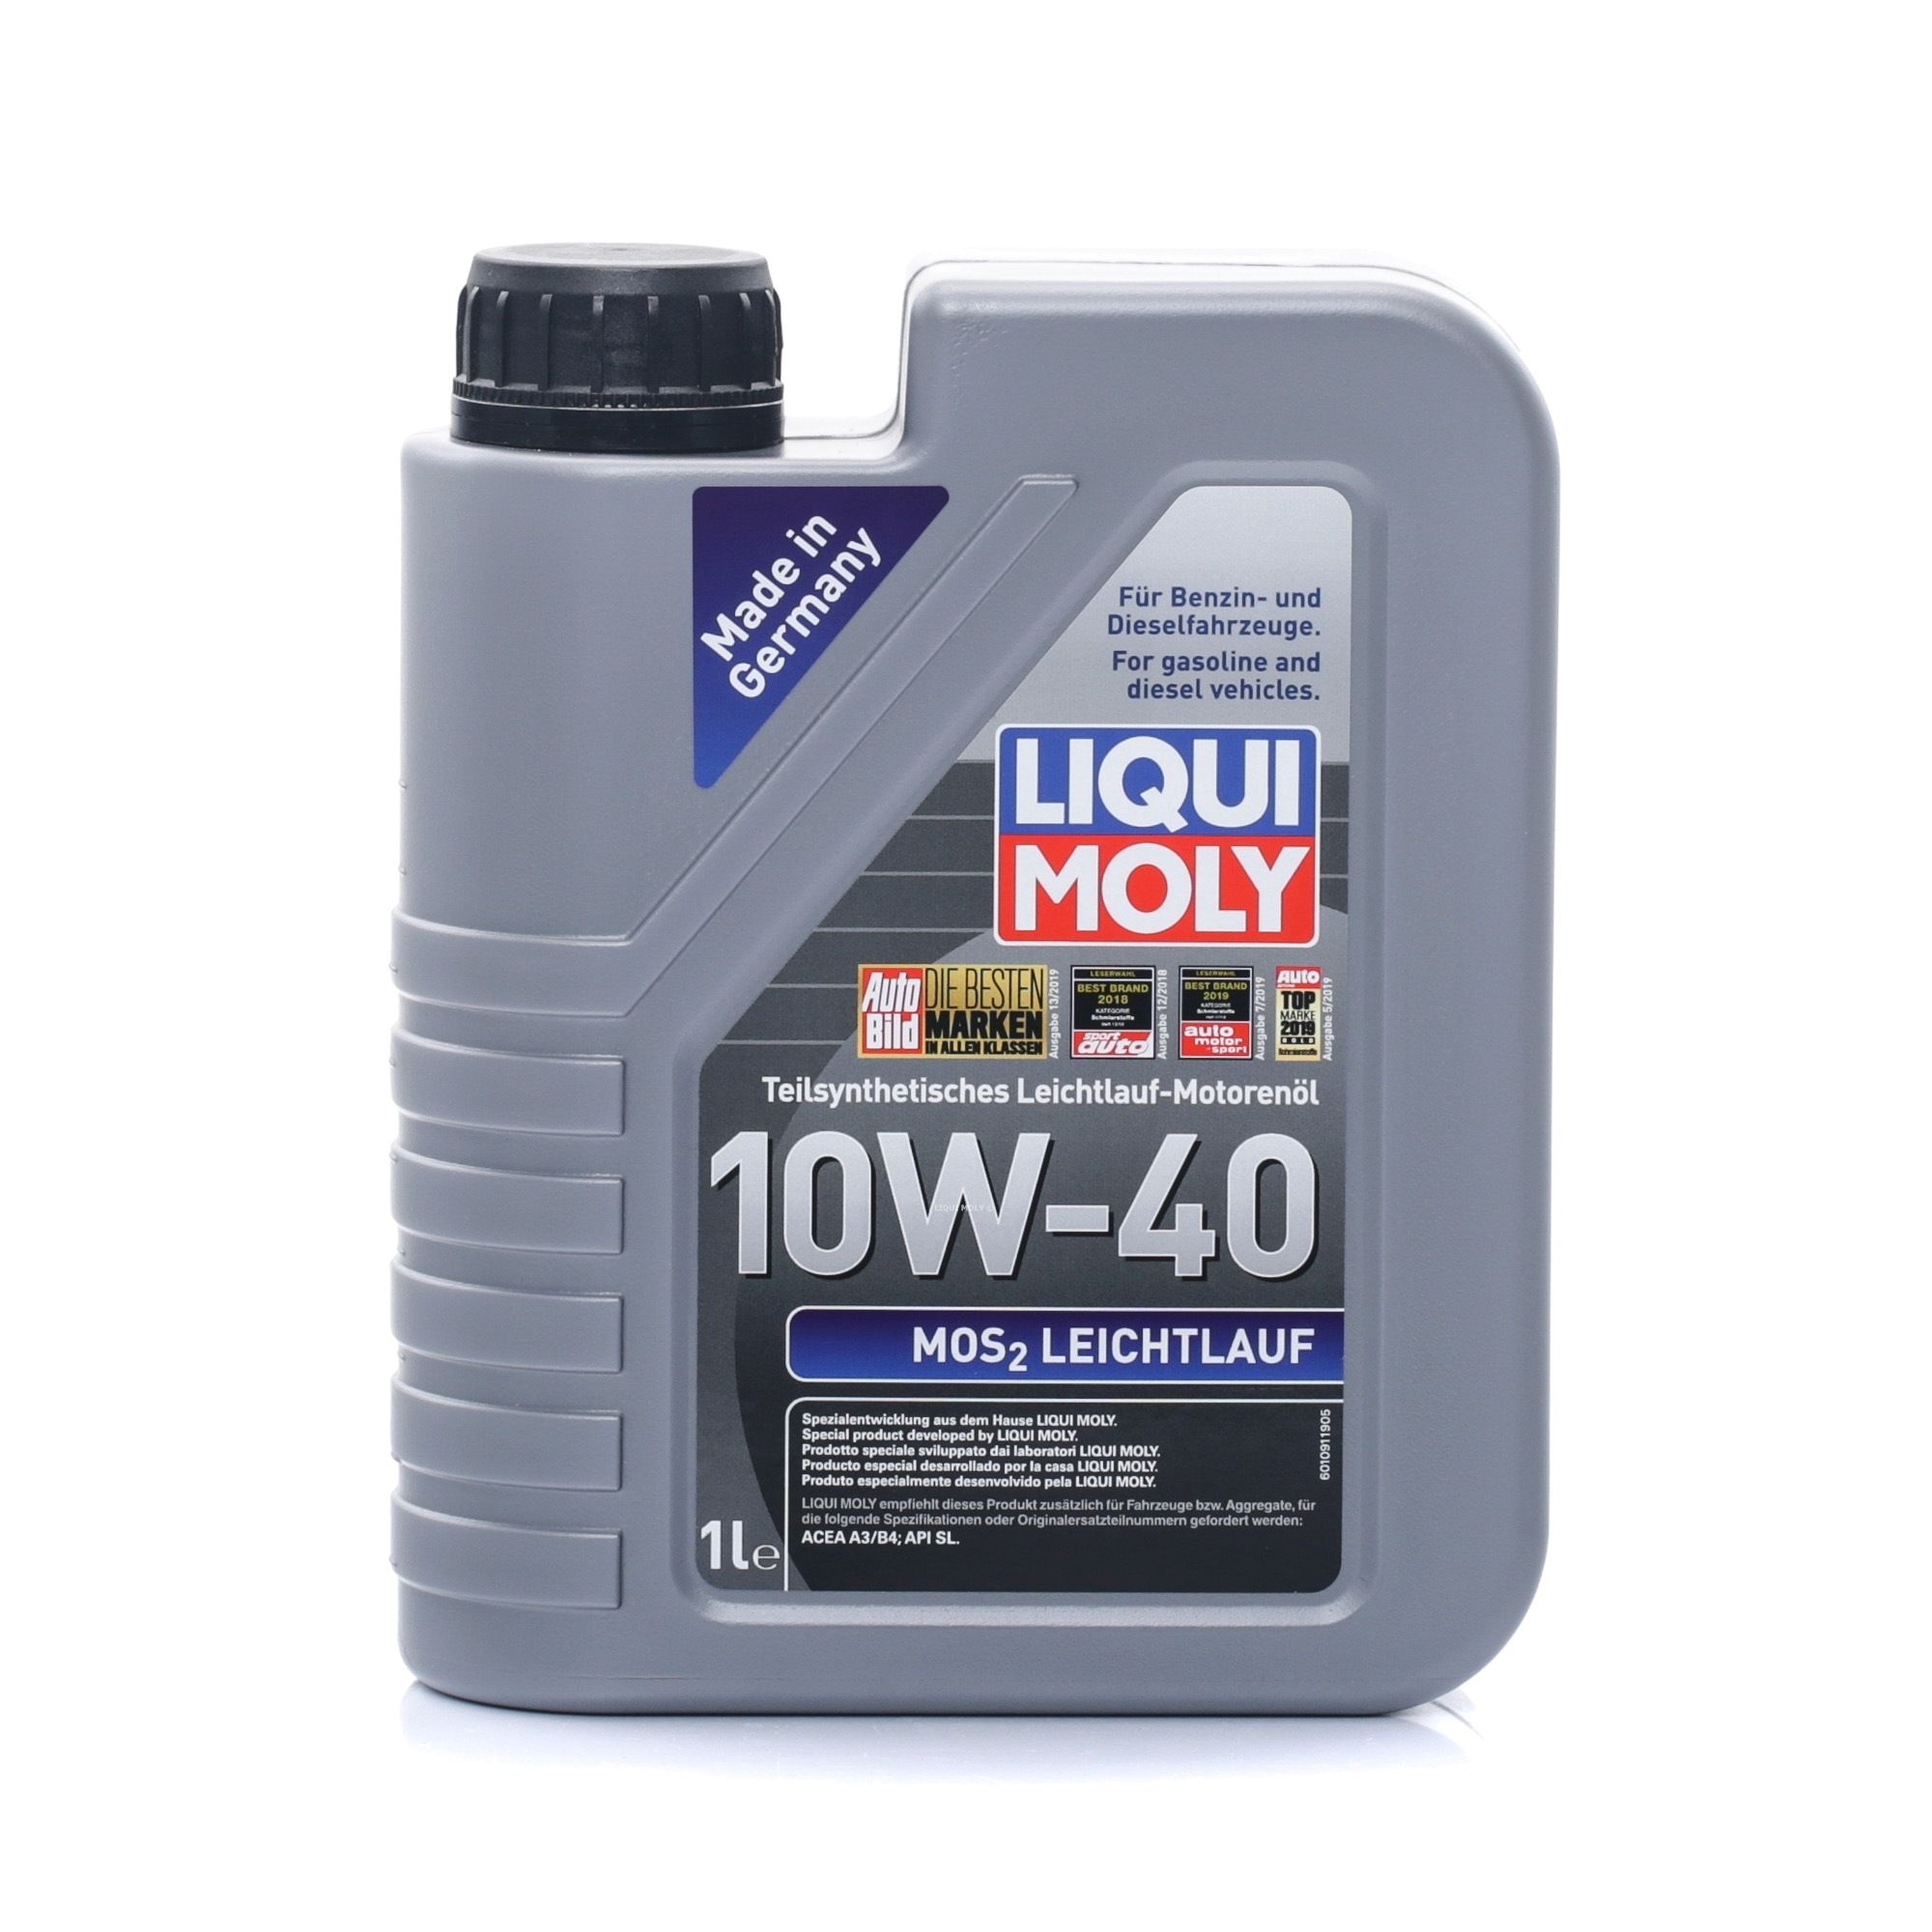 LIQUI MOLY 2626 Engine oil cheap in online store